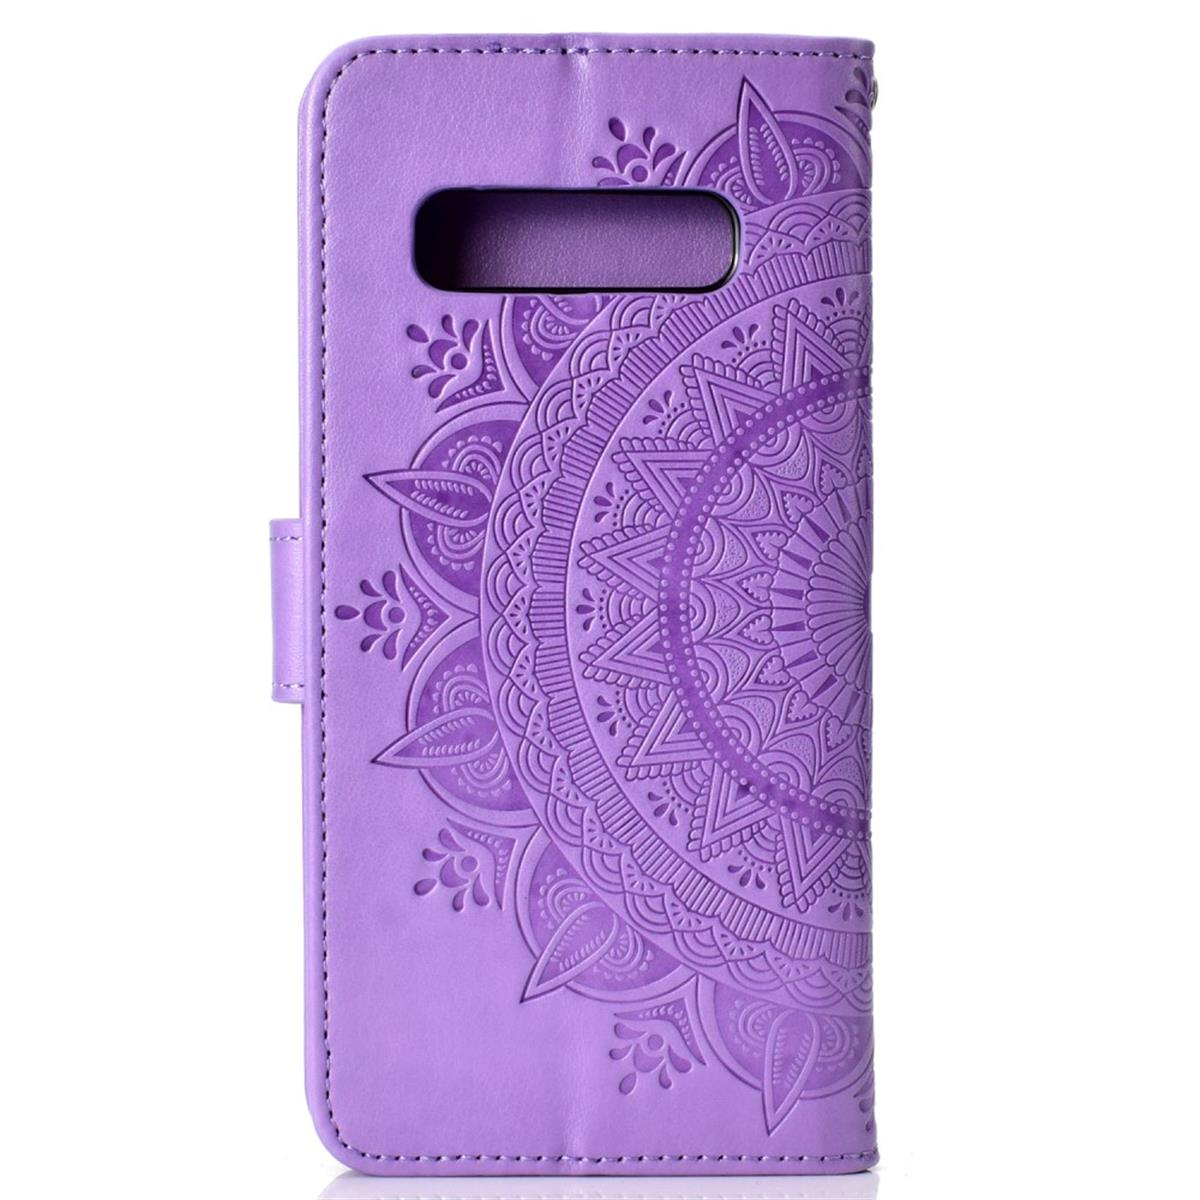 Klapphülle COVERKINGZ Lila Galaxy mit S10, Mandala Bookcover, Muster, Samsung,